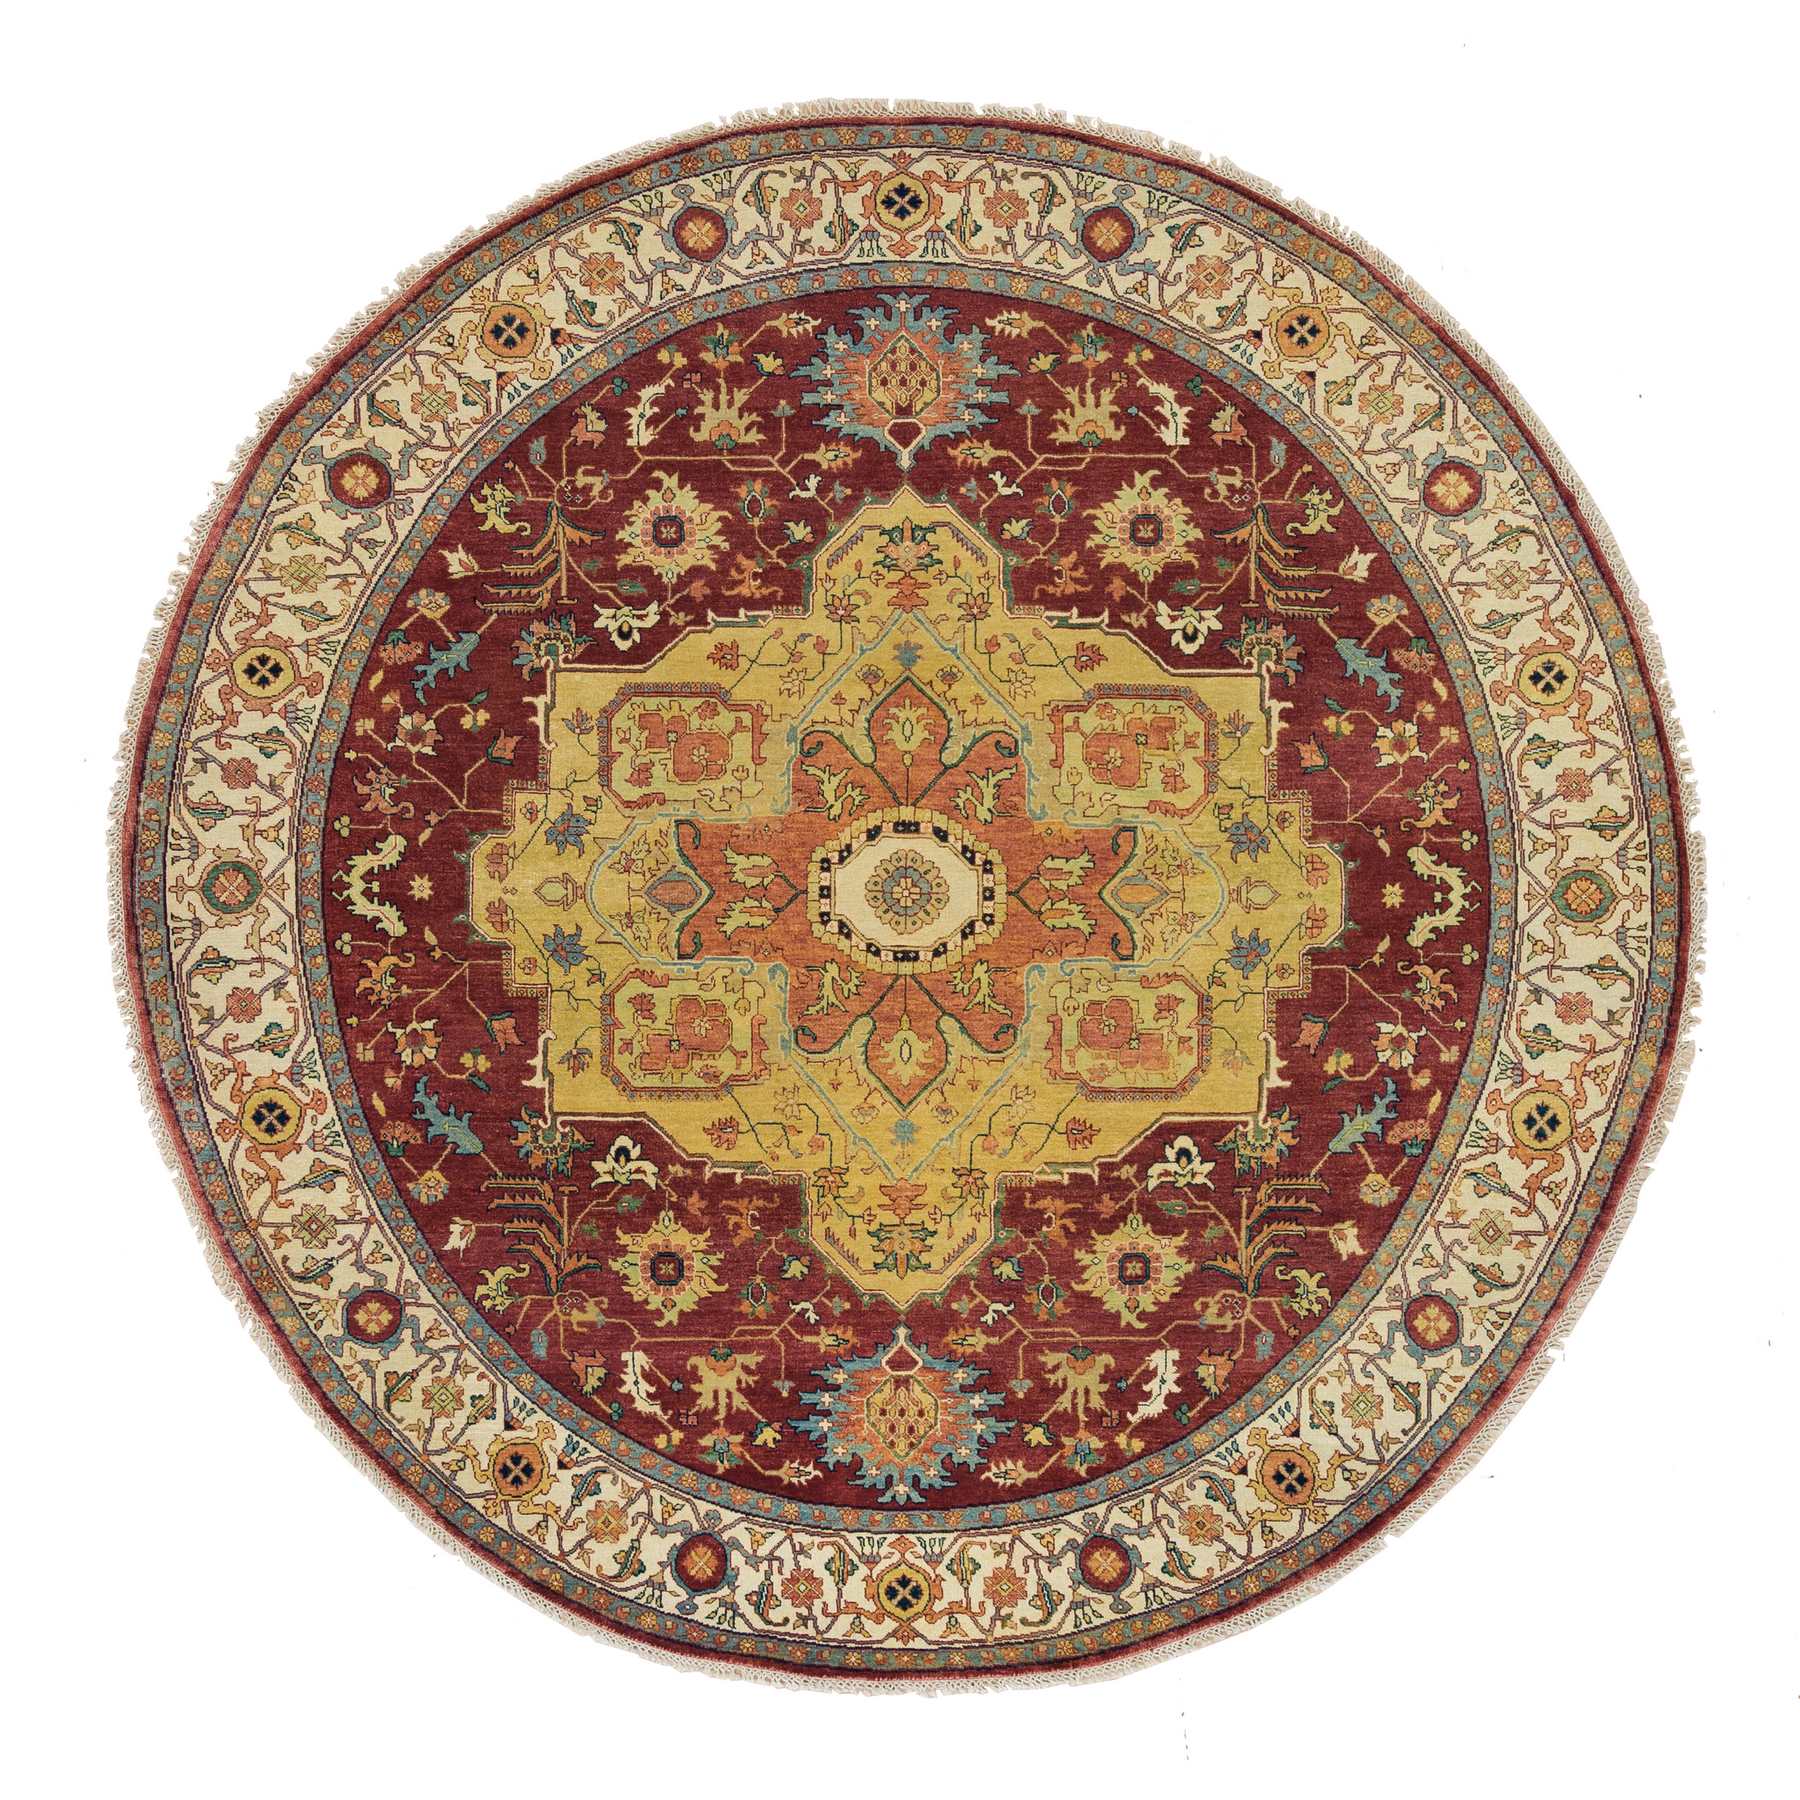 8'1"x8'1" Terracotta Red, Organic Wool, Hand Woven, Antiqued Fine Heriz Re-Creation, Densely Woven, Natural Dyes, Round Oriental Rug 